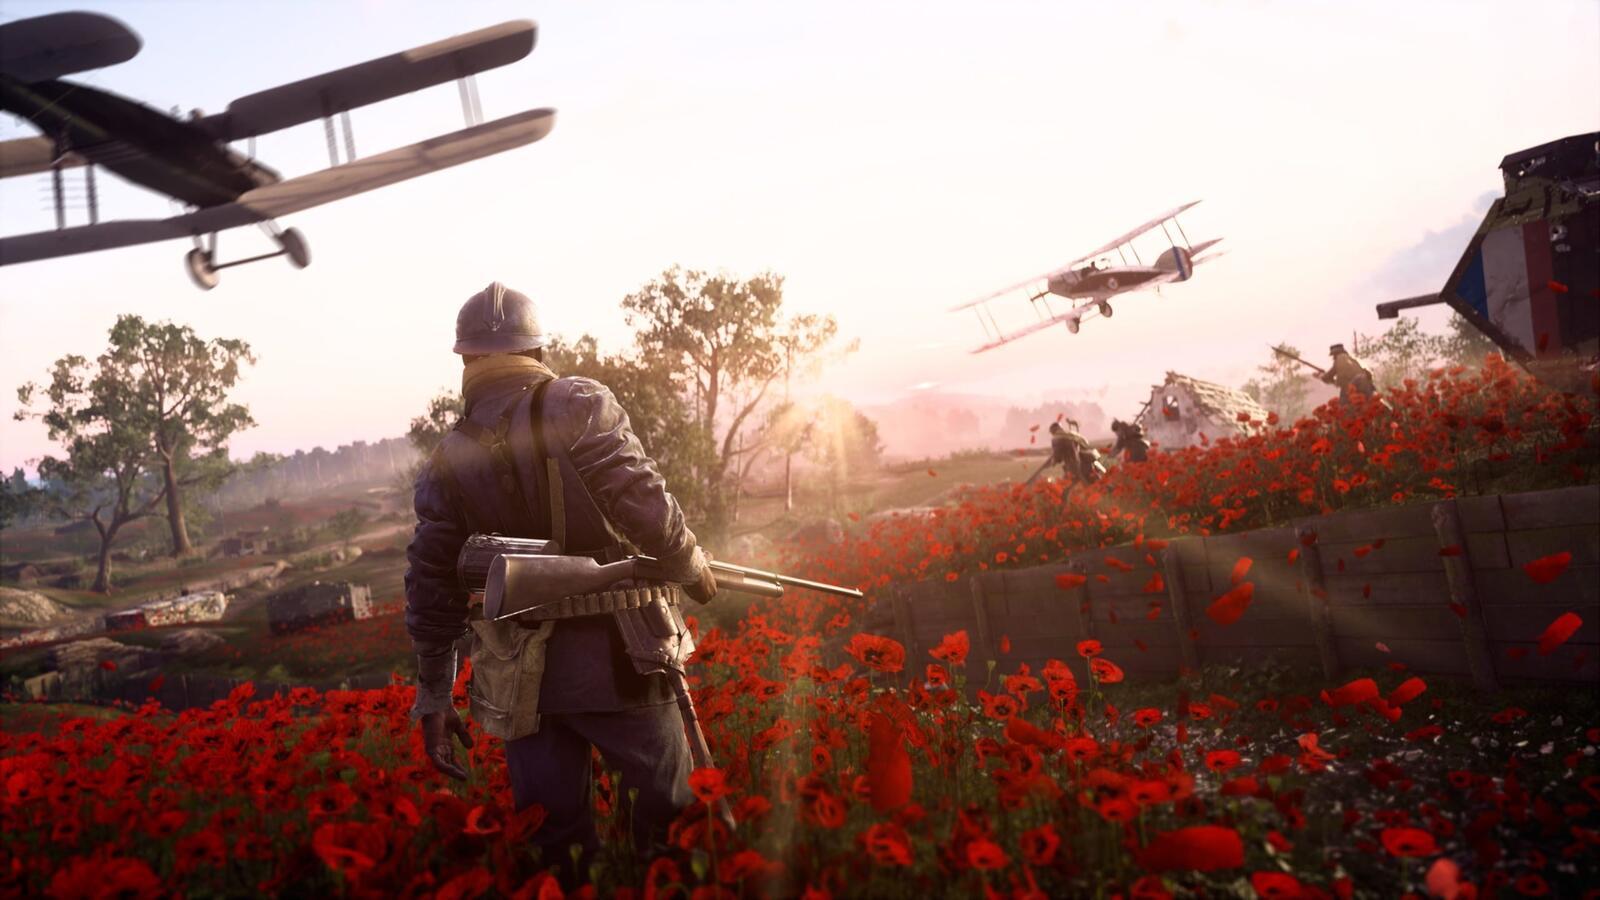 Wallpapers combat 1 poppy flowers aircraft on the desktop